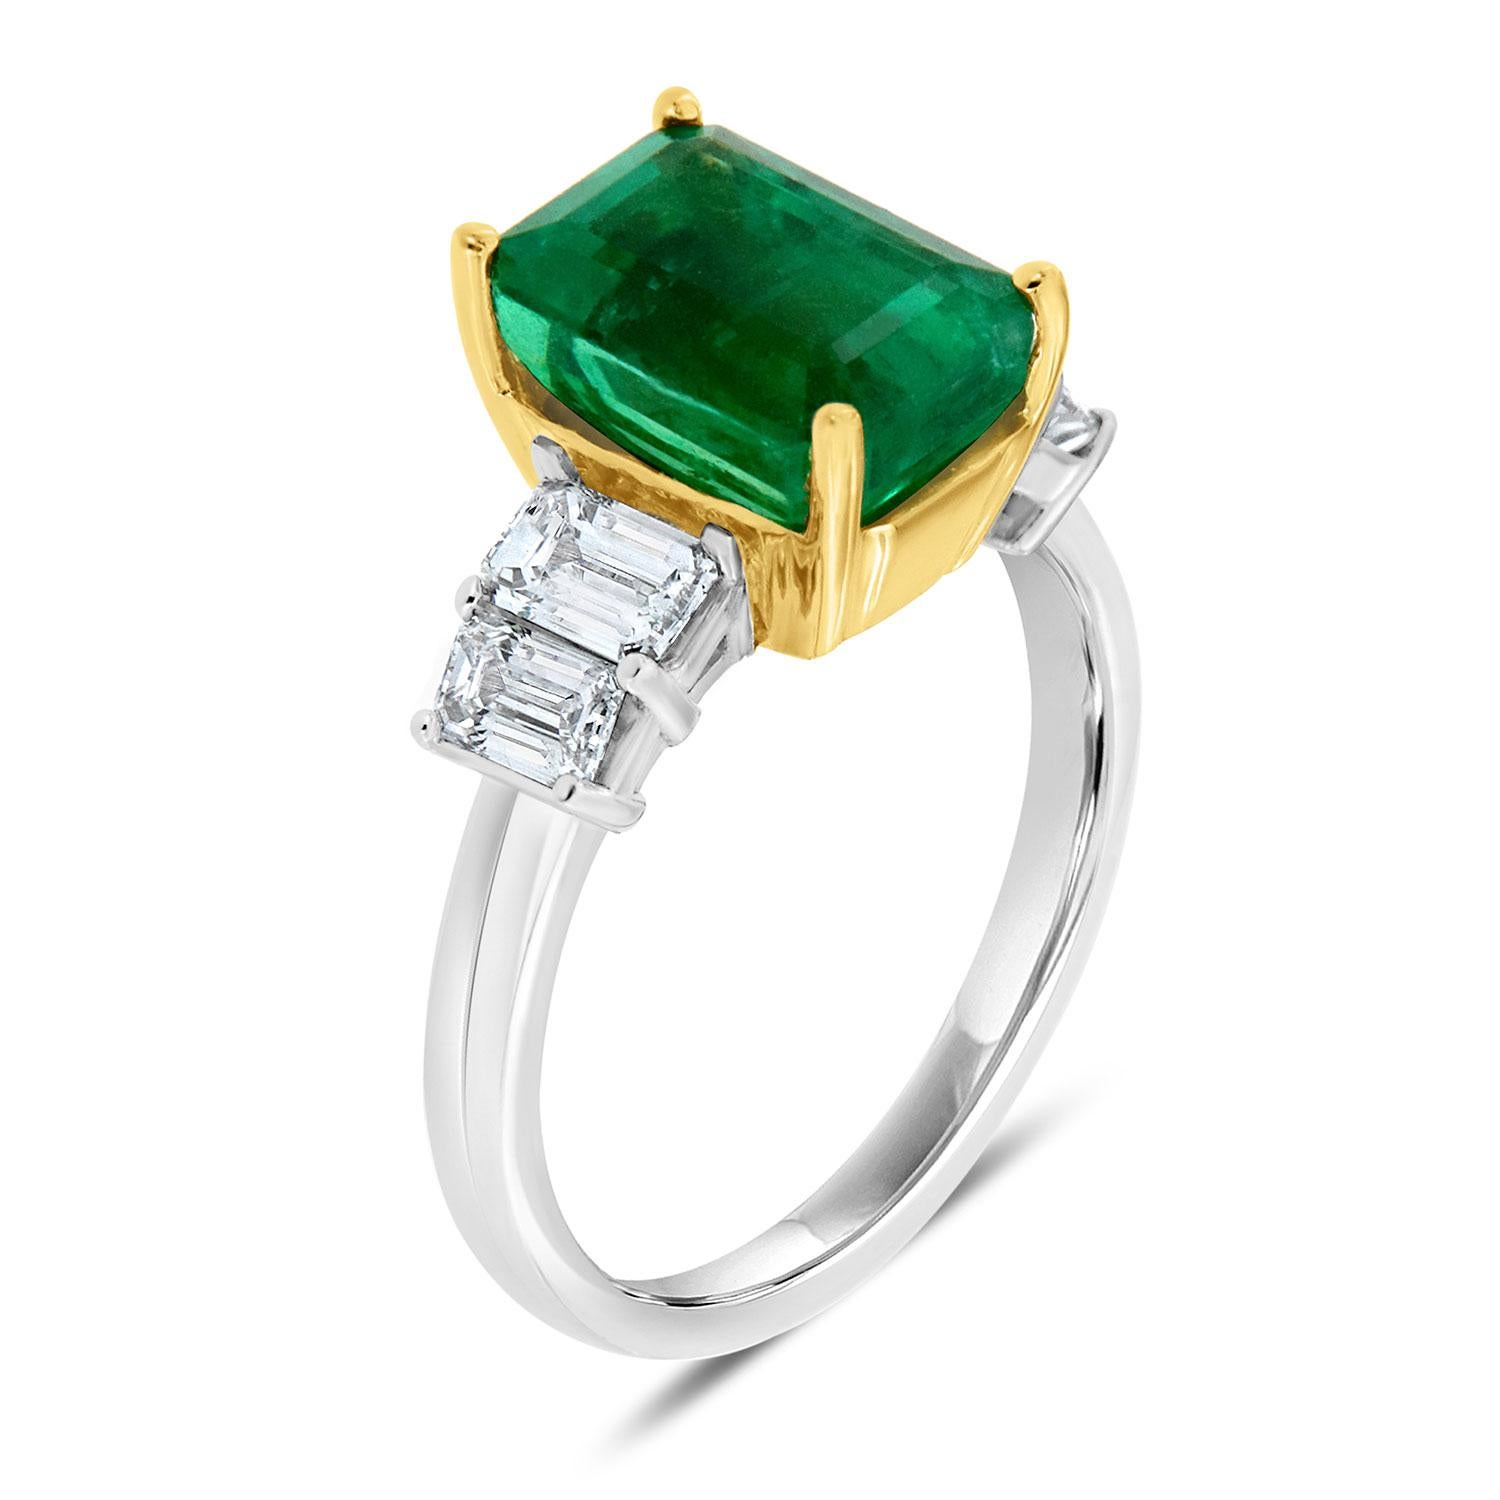 This 18k Two-Tone Gold hand-crafted ring features a vibrant Green Ethiopian Emerald - Shaped Natural Emerald. This unique emerald exhibits a similar color to a Colombian Emerald. Very light included, nothing is visible to the naked eye. The emerald